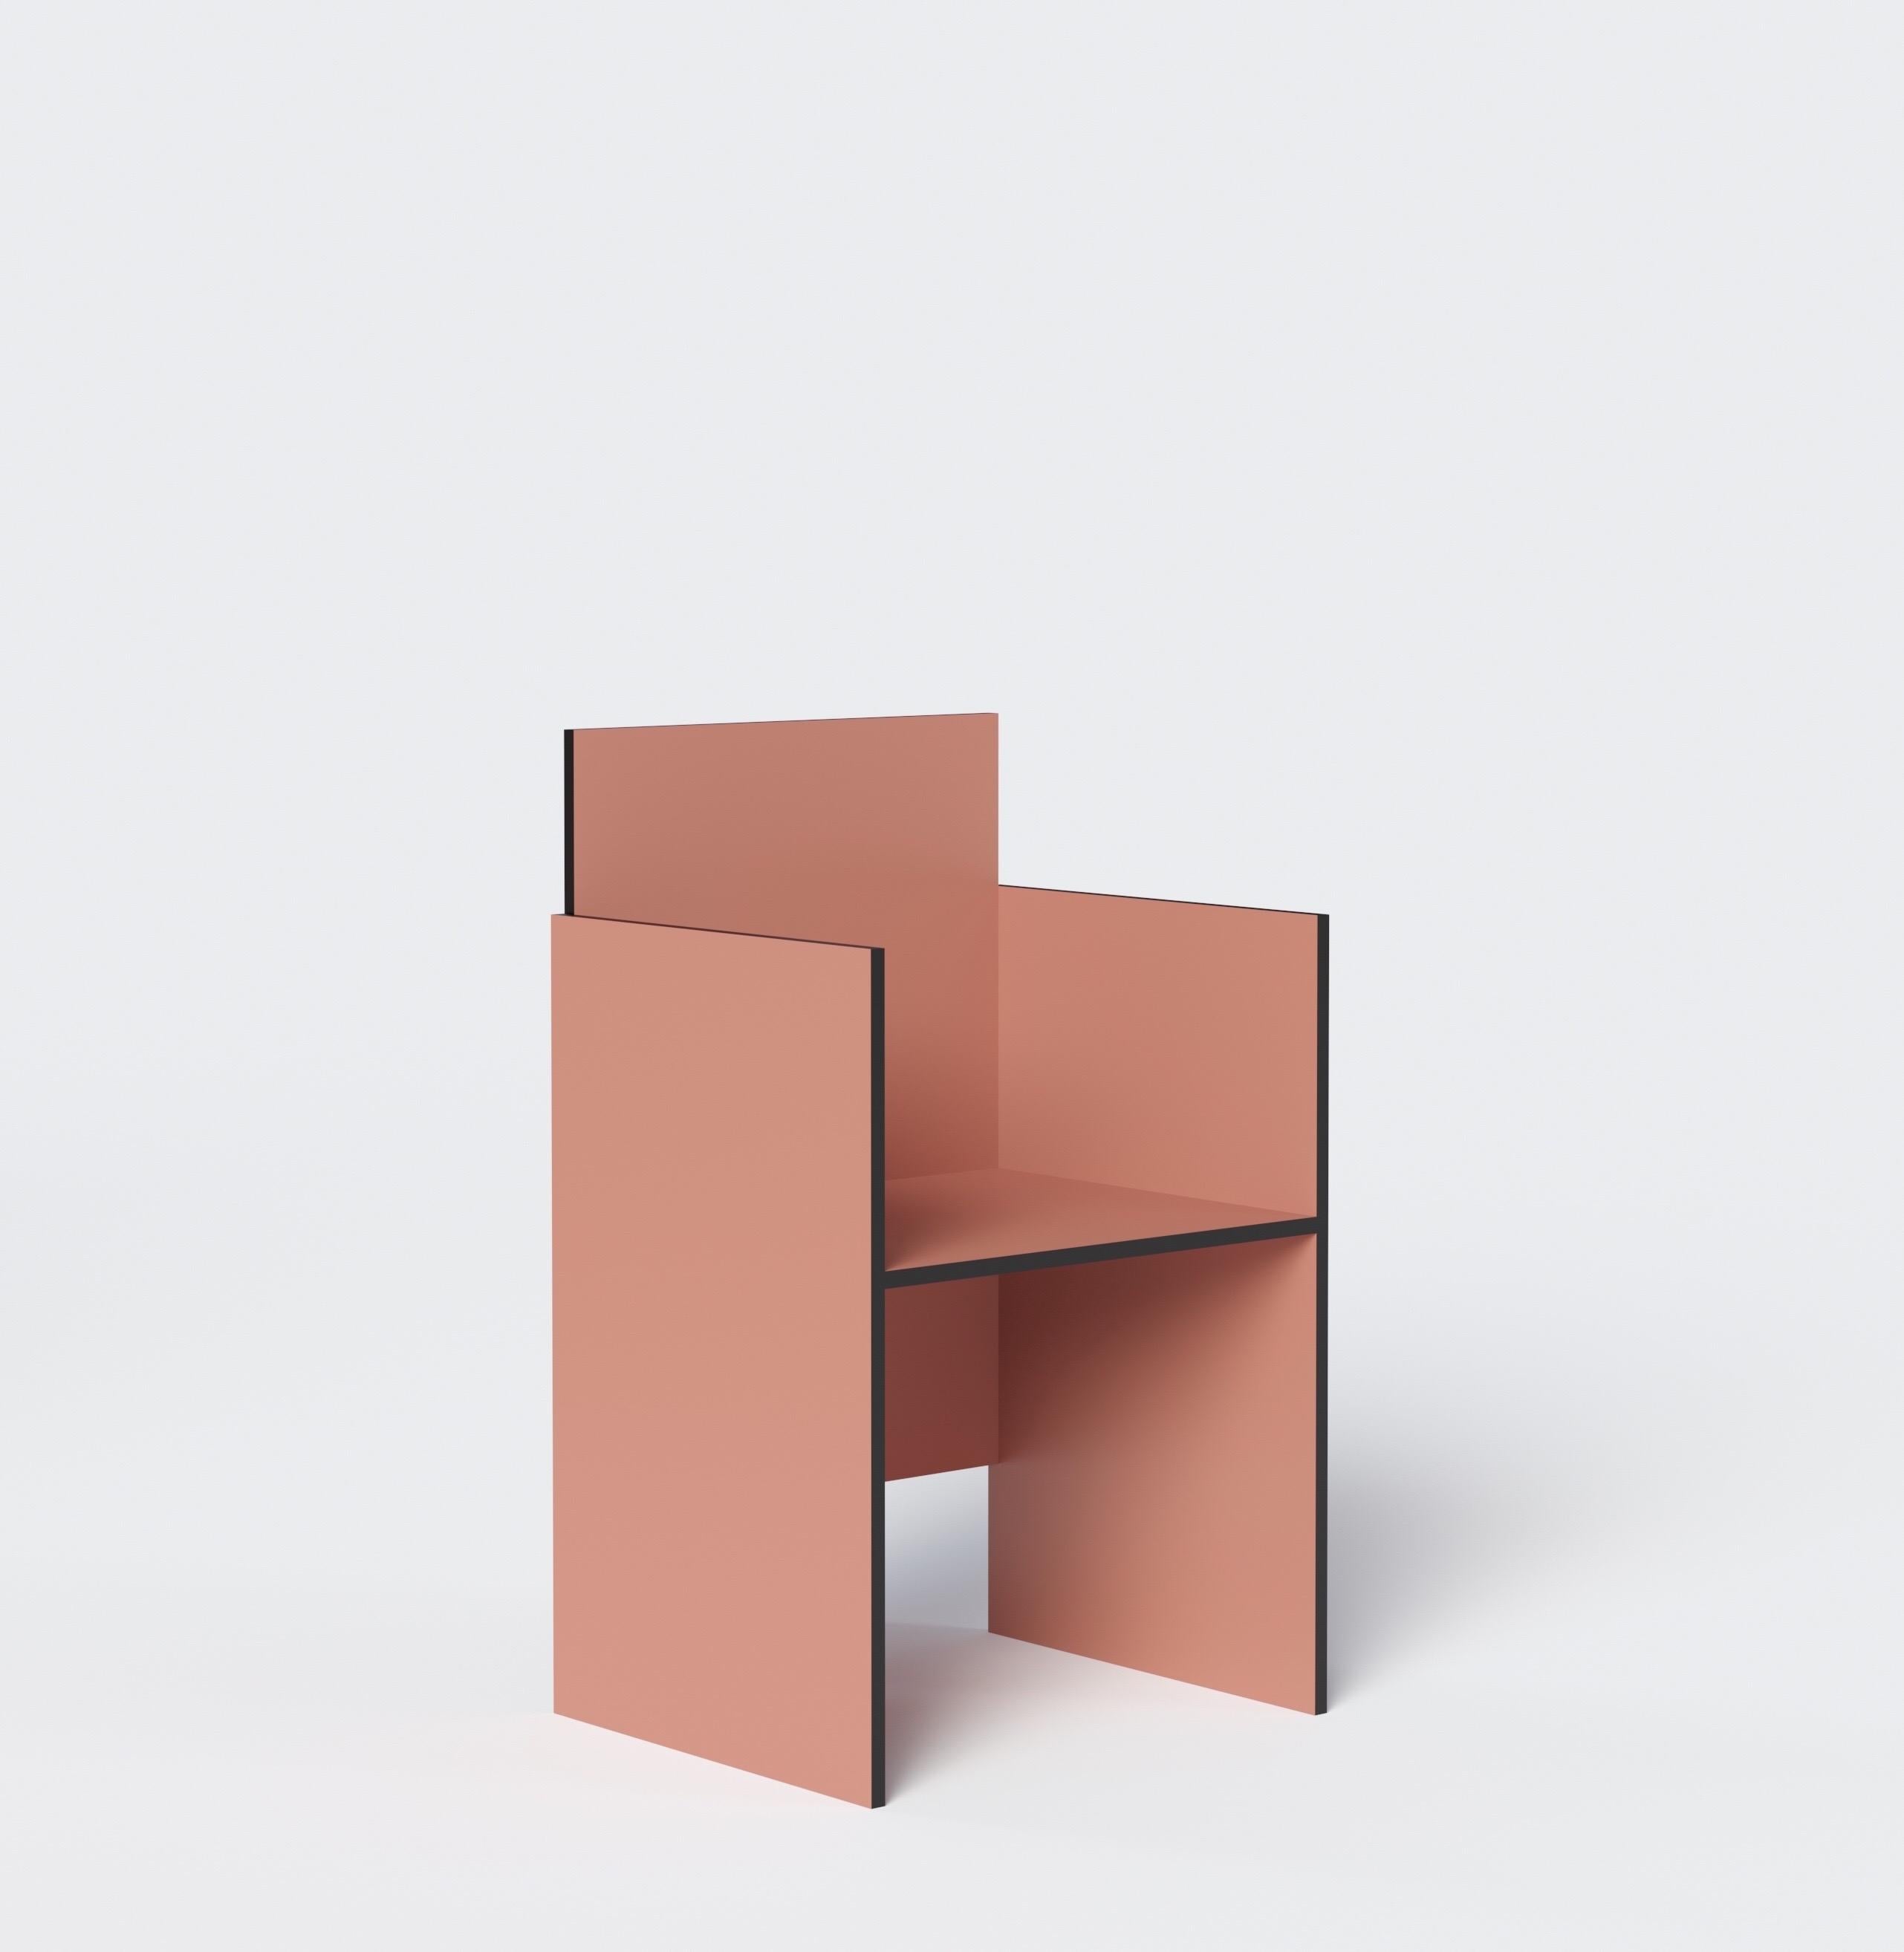 Geometric and Minimalist chair by Russian designer Dmitry Samygin. Inspired by Gerrit Rietveld and Bauhaus style. 

Plywood
88.5 x 45 x 45 cm

Choose your color! 

Two versions:
- One arm (right or left)
- Two arms.